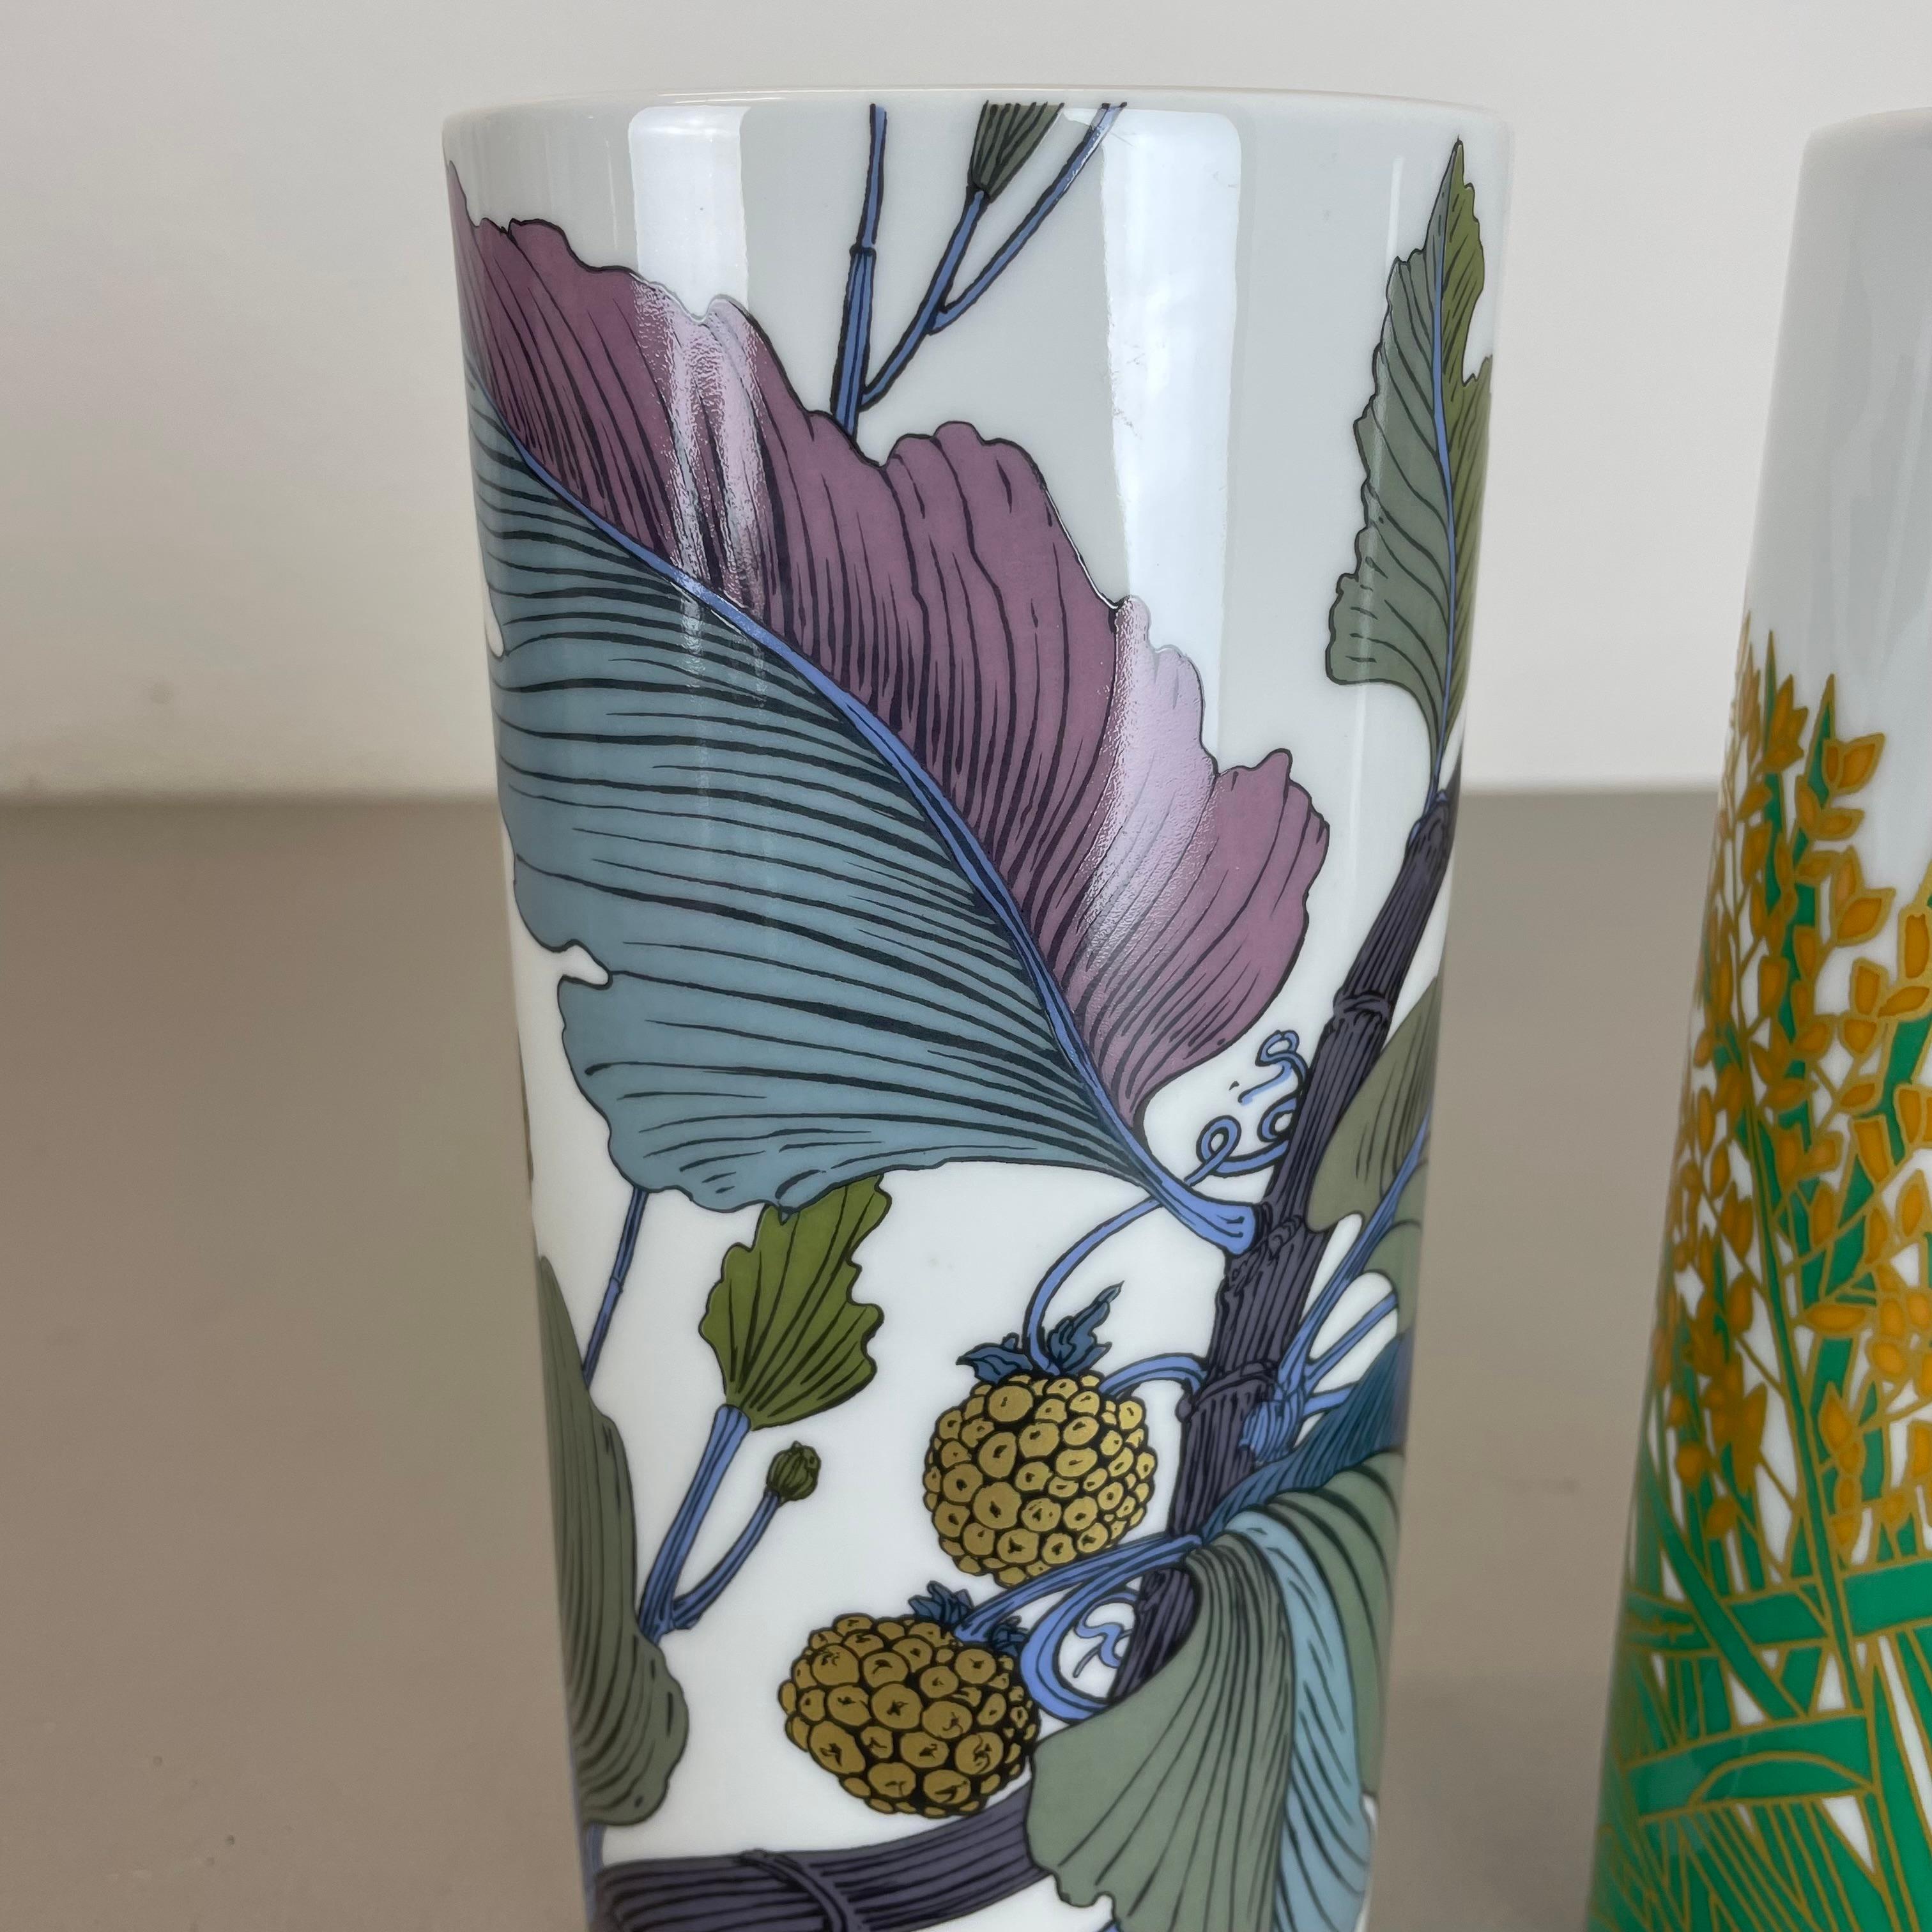 20th Century Set of 2 Floral Vases by W. Bauer and A. Le Foll for Rosenthal, Germany, 1980s For Sale